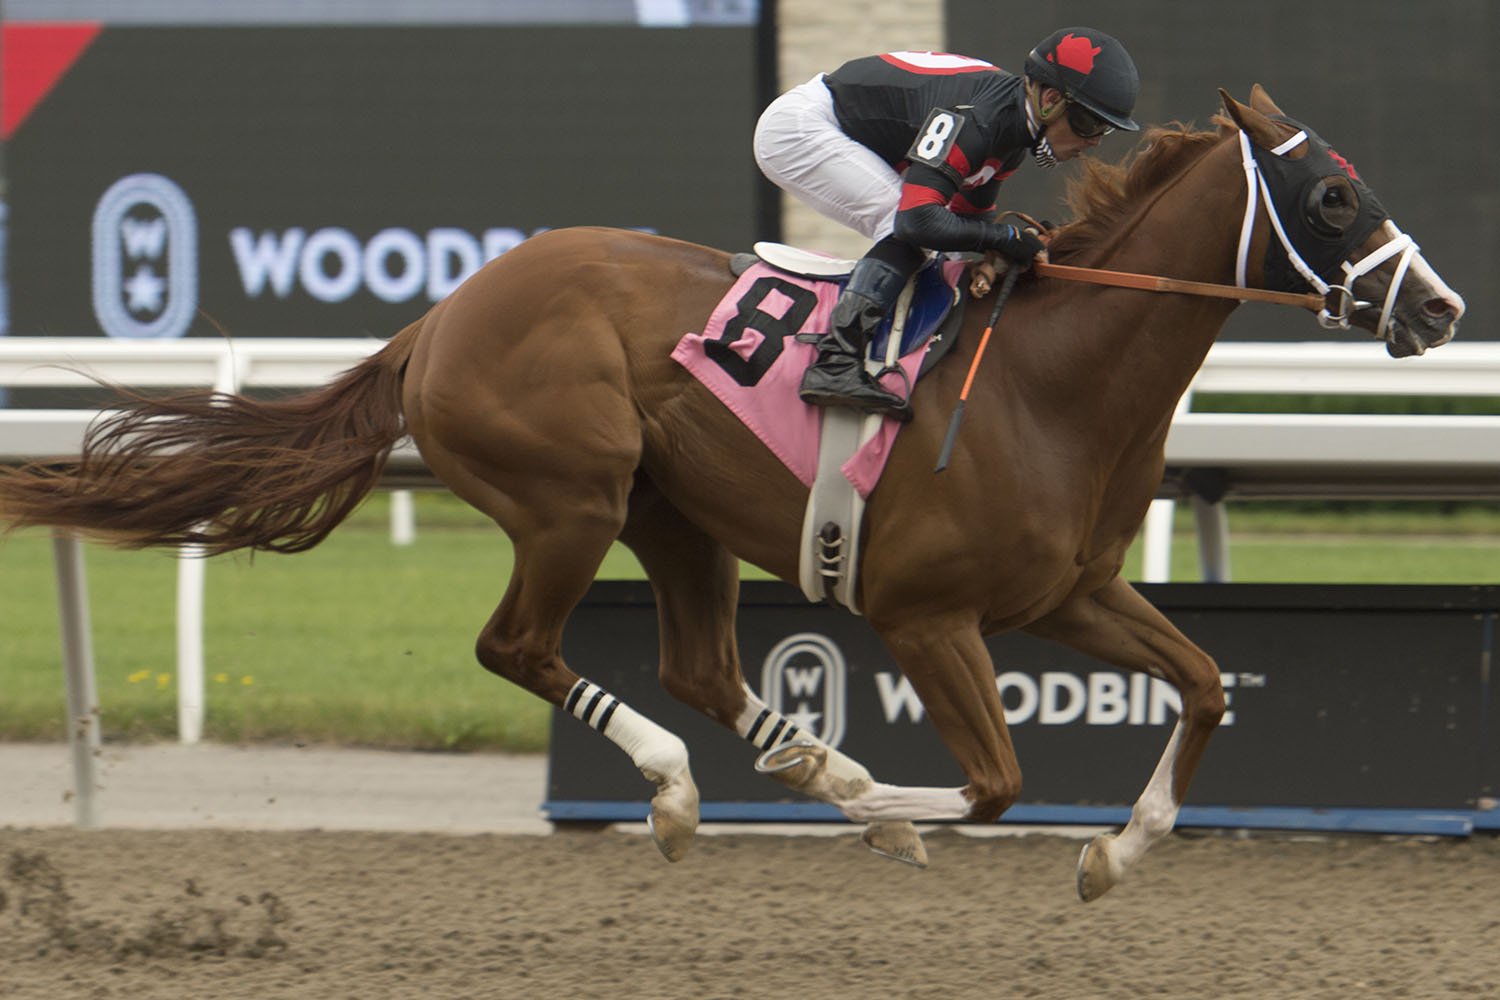 Red Hierarchy winning on July 12 at Woodbine Racetrack. (Michael Burns Photo)